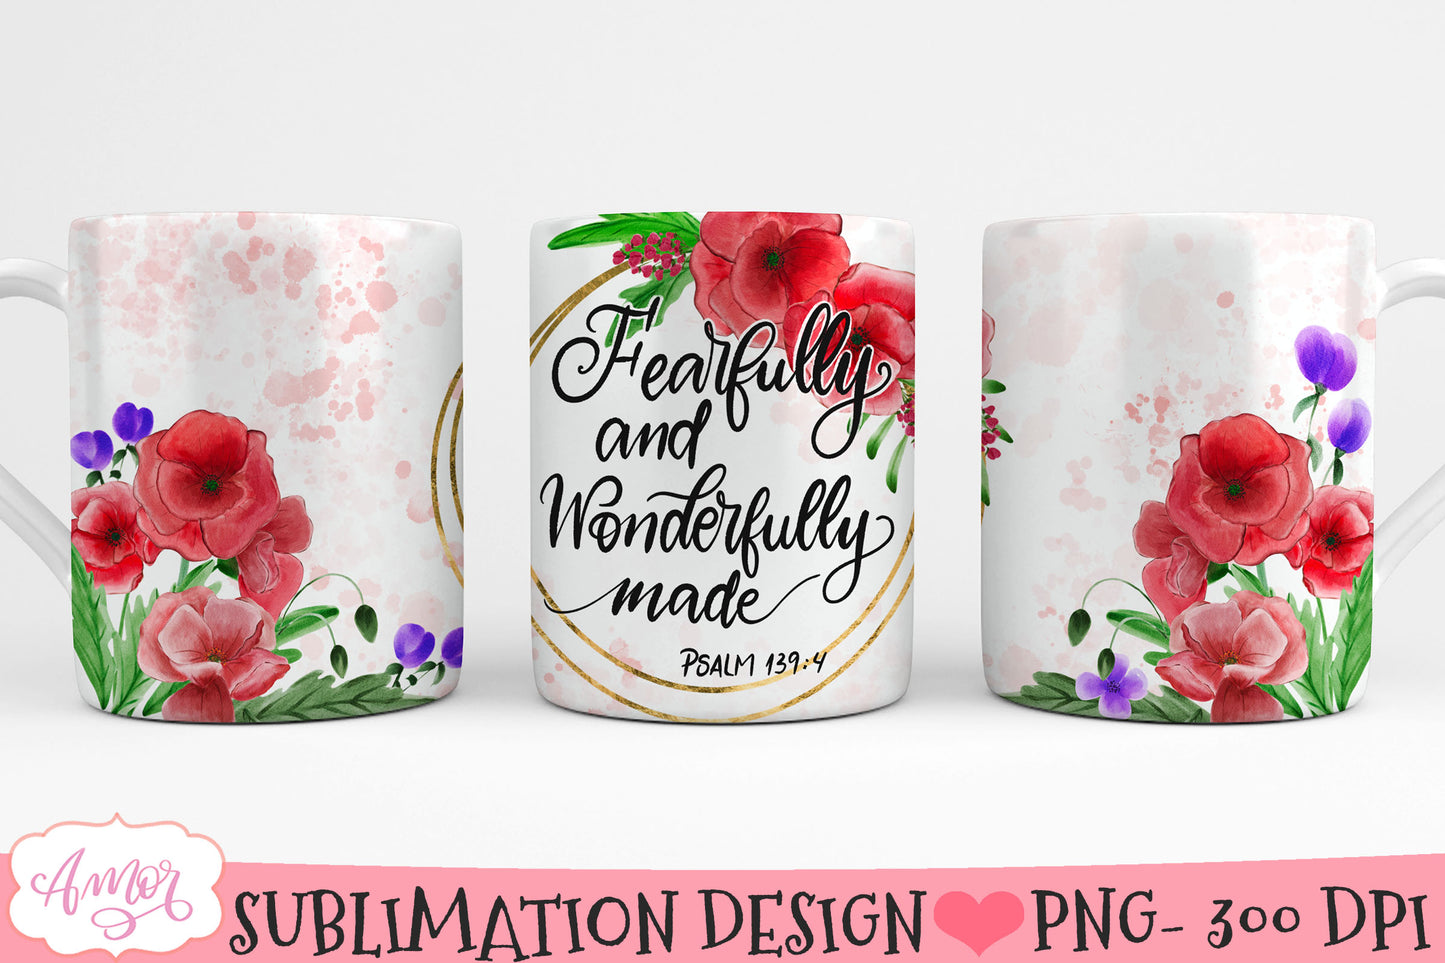 Bundle of 6 Bible Verse Mug Wraps with Hand-Painted Florals